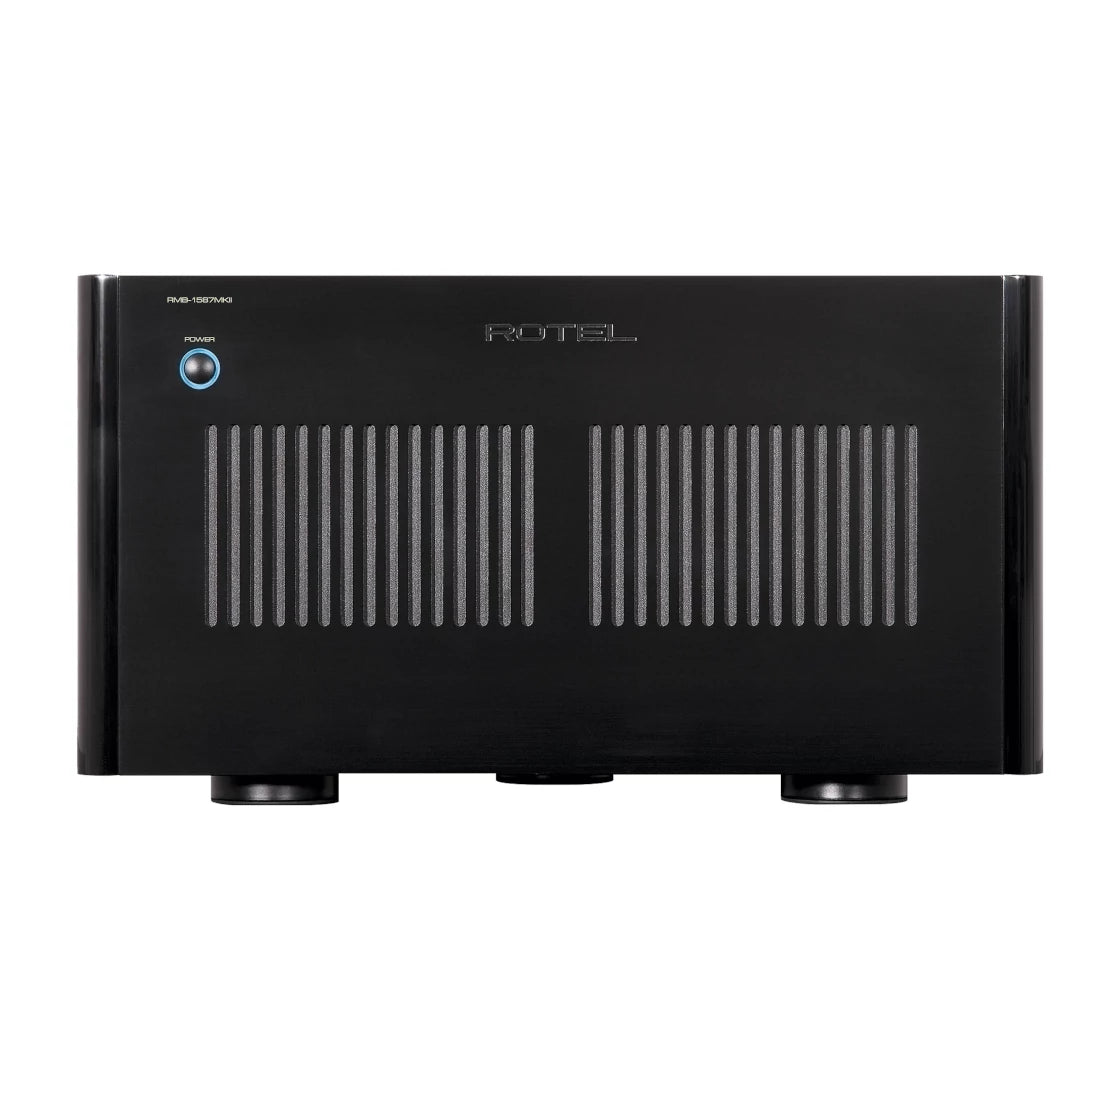 Rotel RMB-1587 MKII 7 channel Power Amplifier - Black